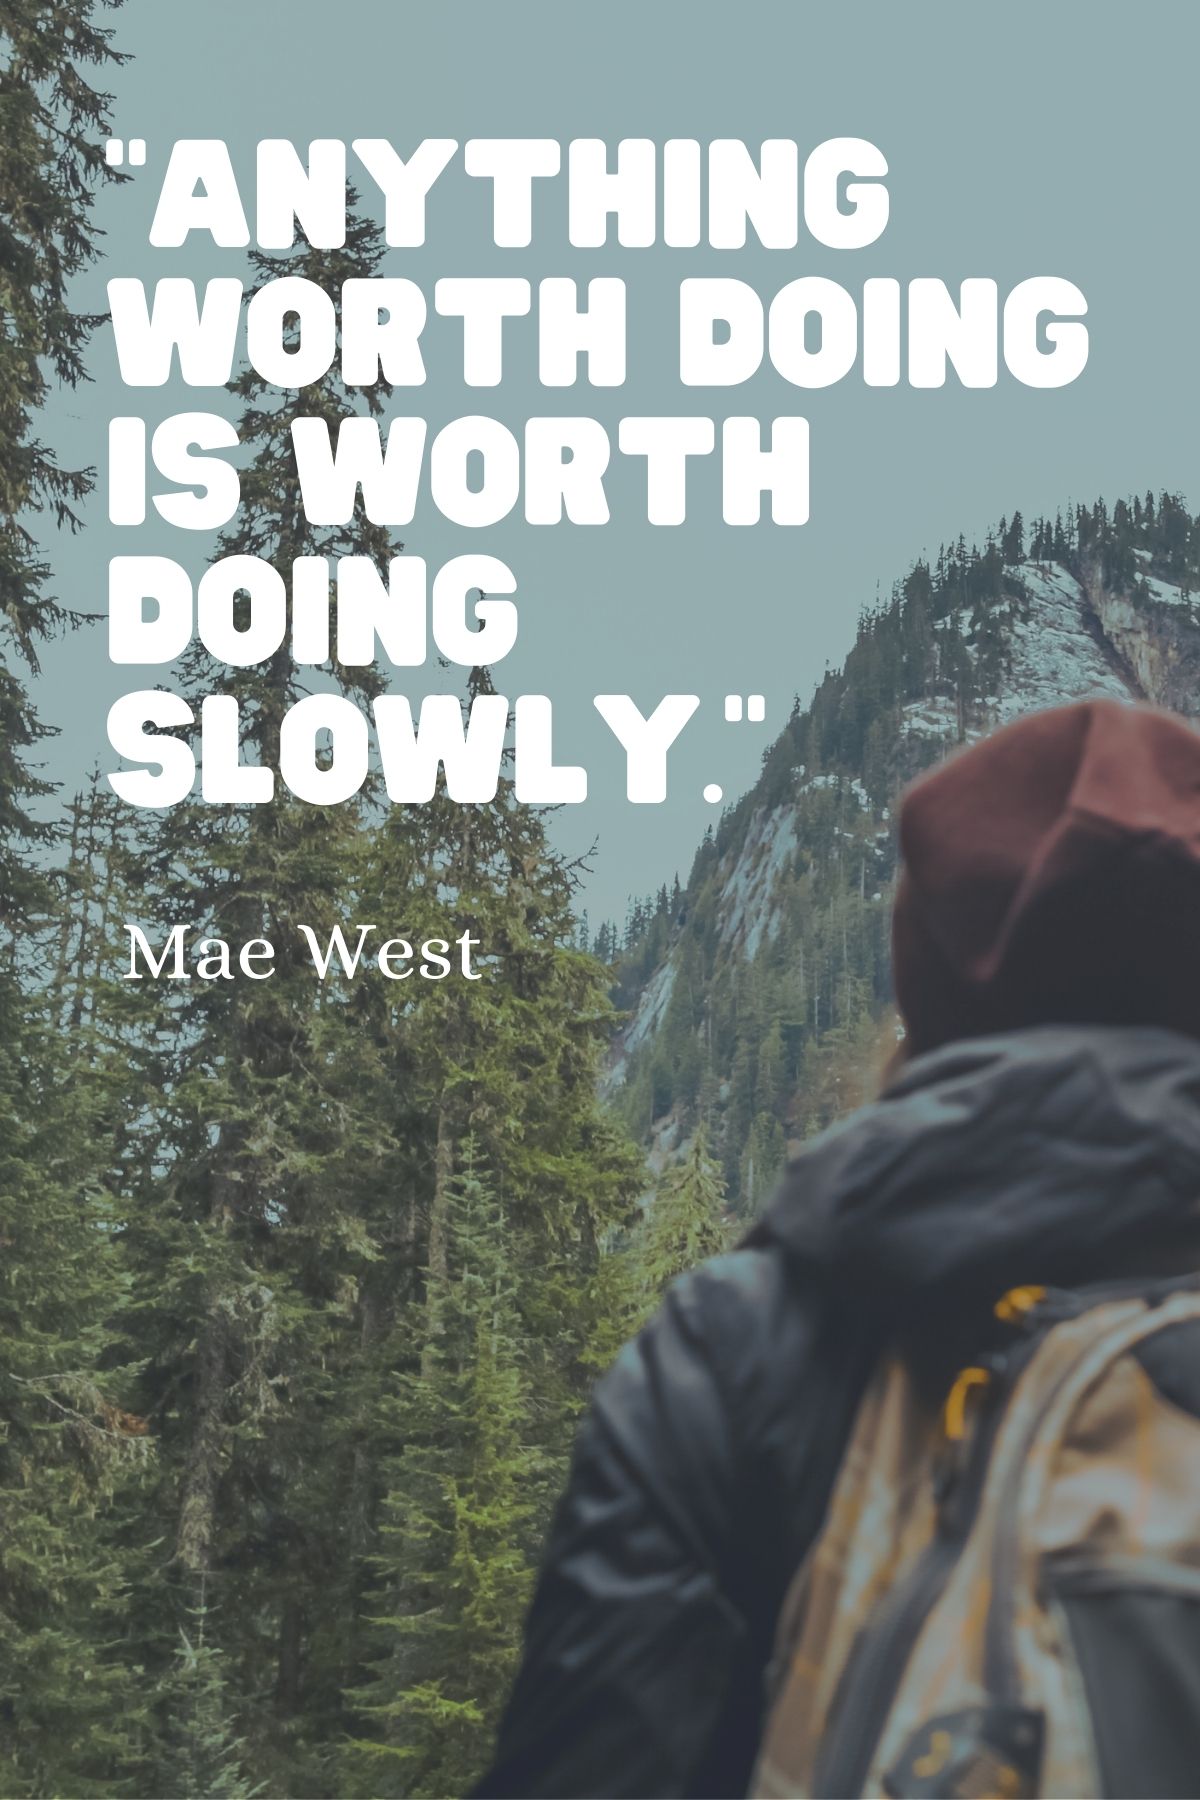 Slow living quote saying “Anything worth doing is worth doing slowly.” - Mae West 
